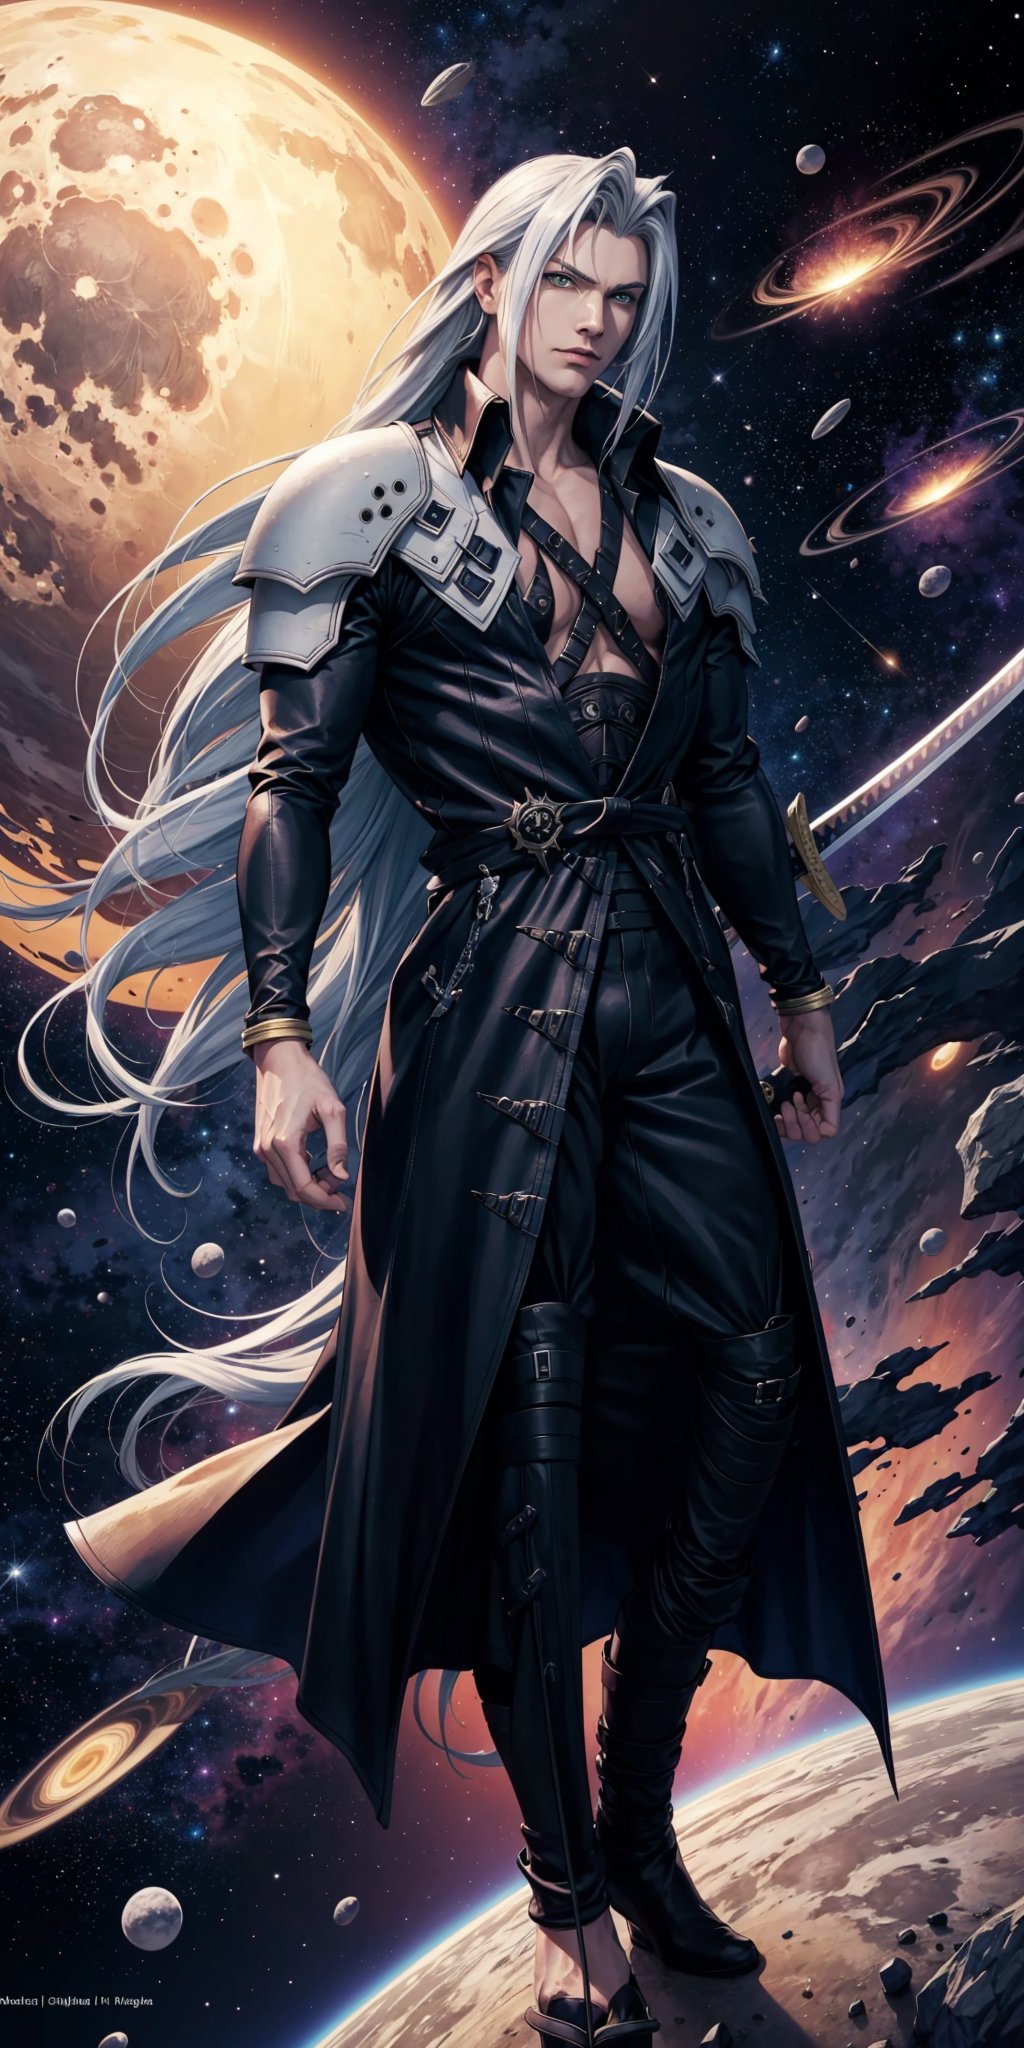 Sephiroth (Final Fantasy),extending his hand,on comet in space,nebula background,fantasy,scifi,masamune,extremely long katana,upper body shot, hes about to get omnishlased big time =b